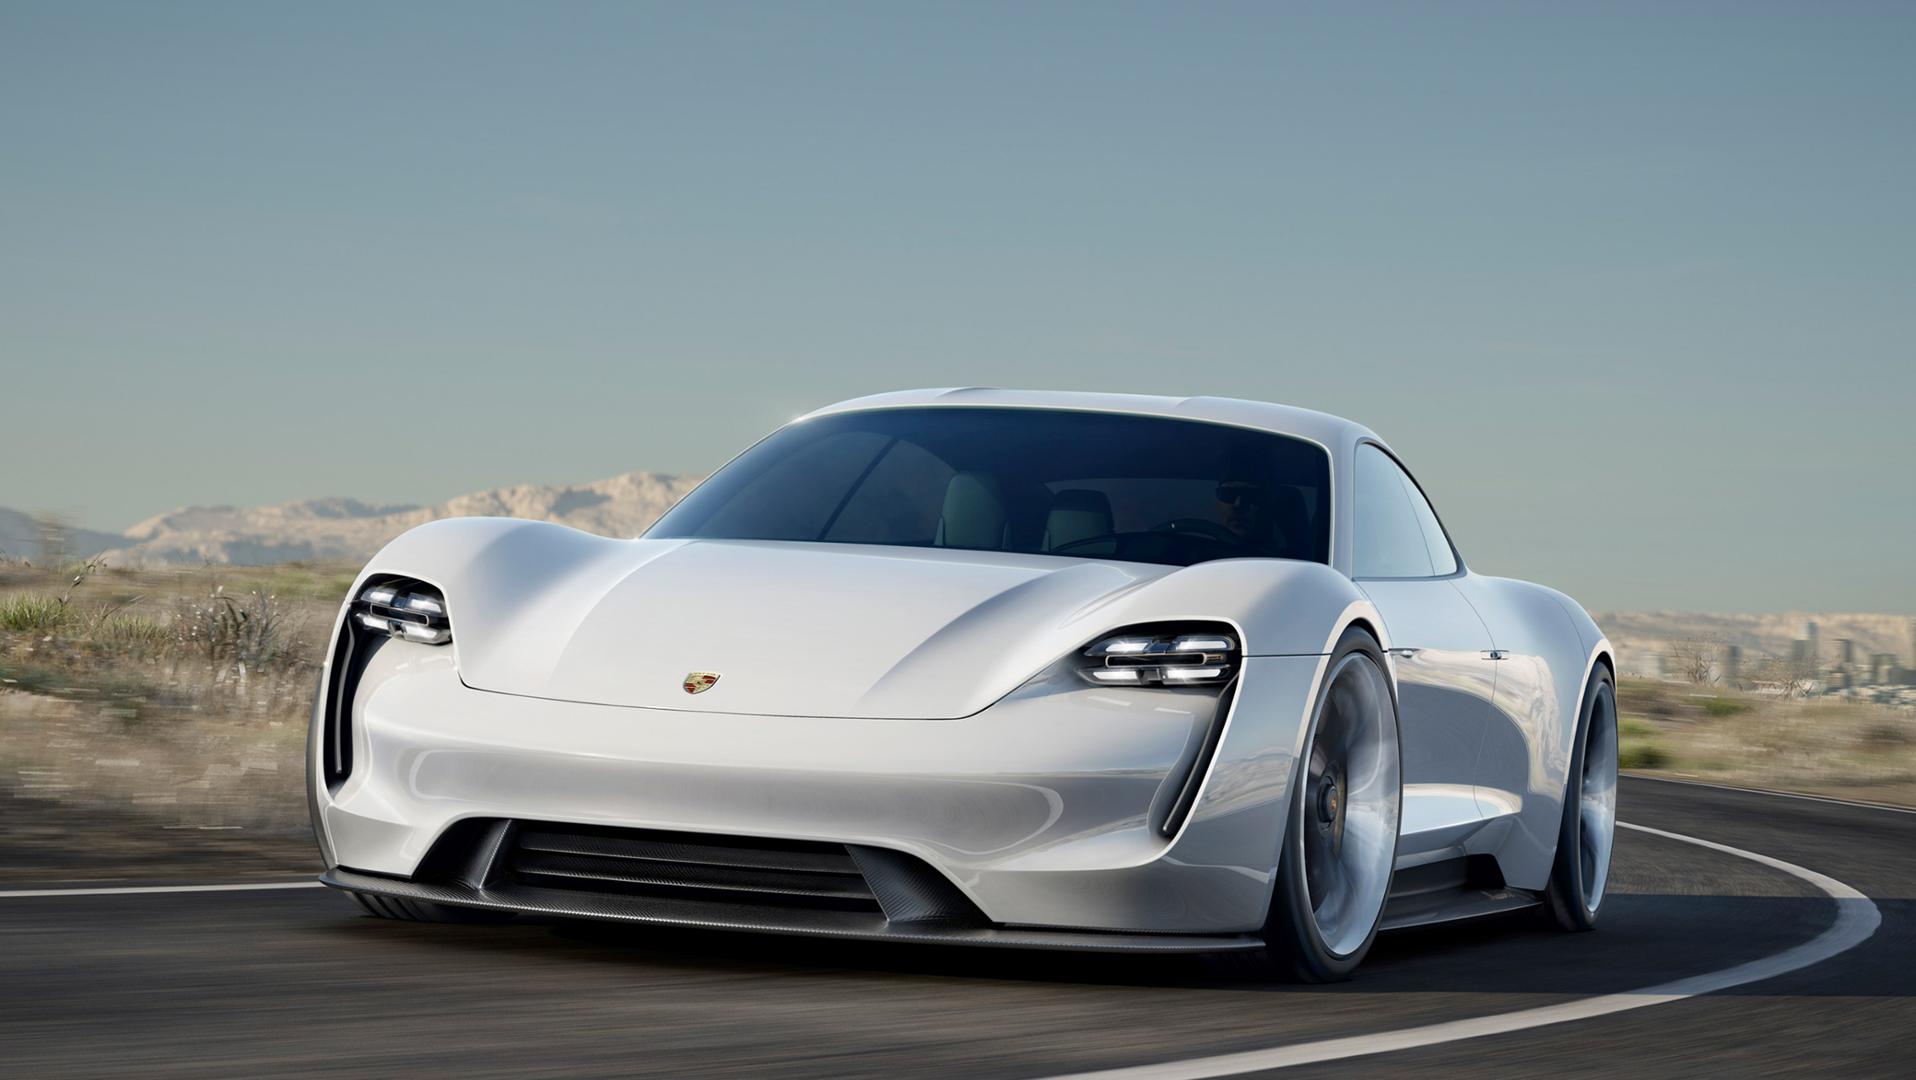 Confirmed: Porsche Mission E Electric Car Will Be Built By \u002639;End Of Decade\u002639;